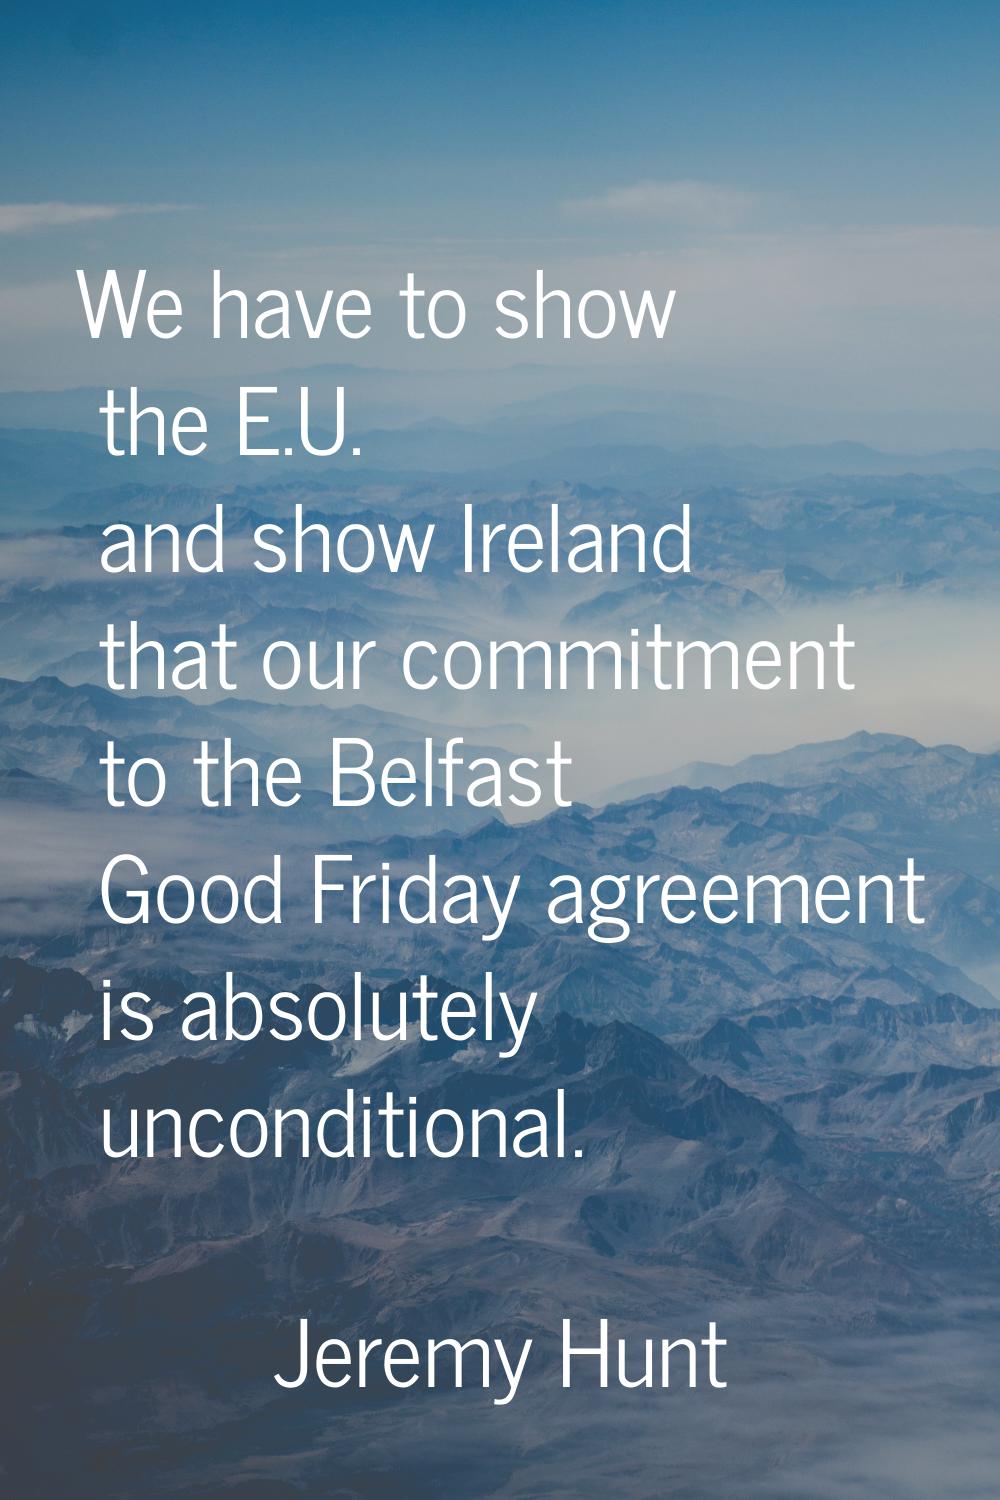 We have to show the E.U. and show Ireland that our commitment to the Belfast Good Friday agreement 